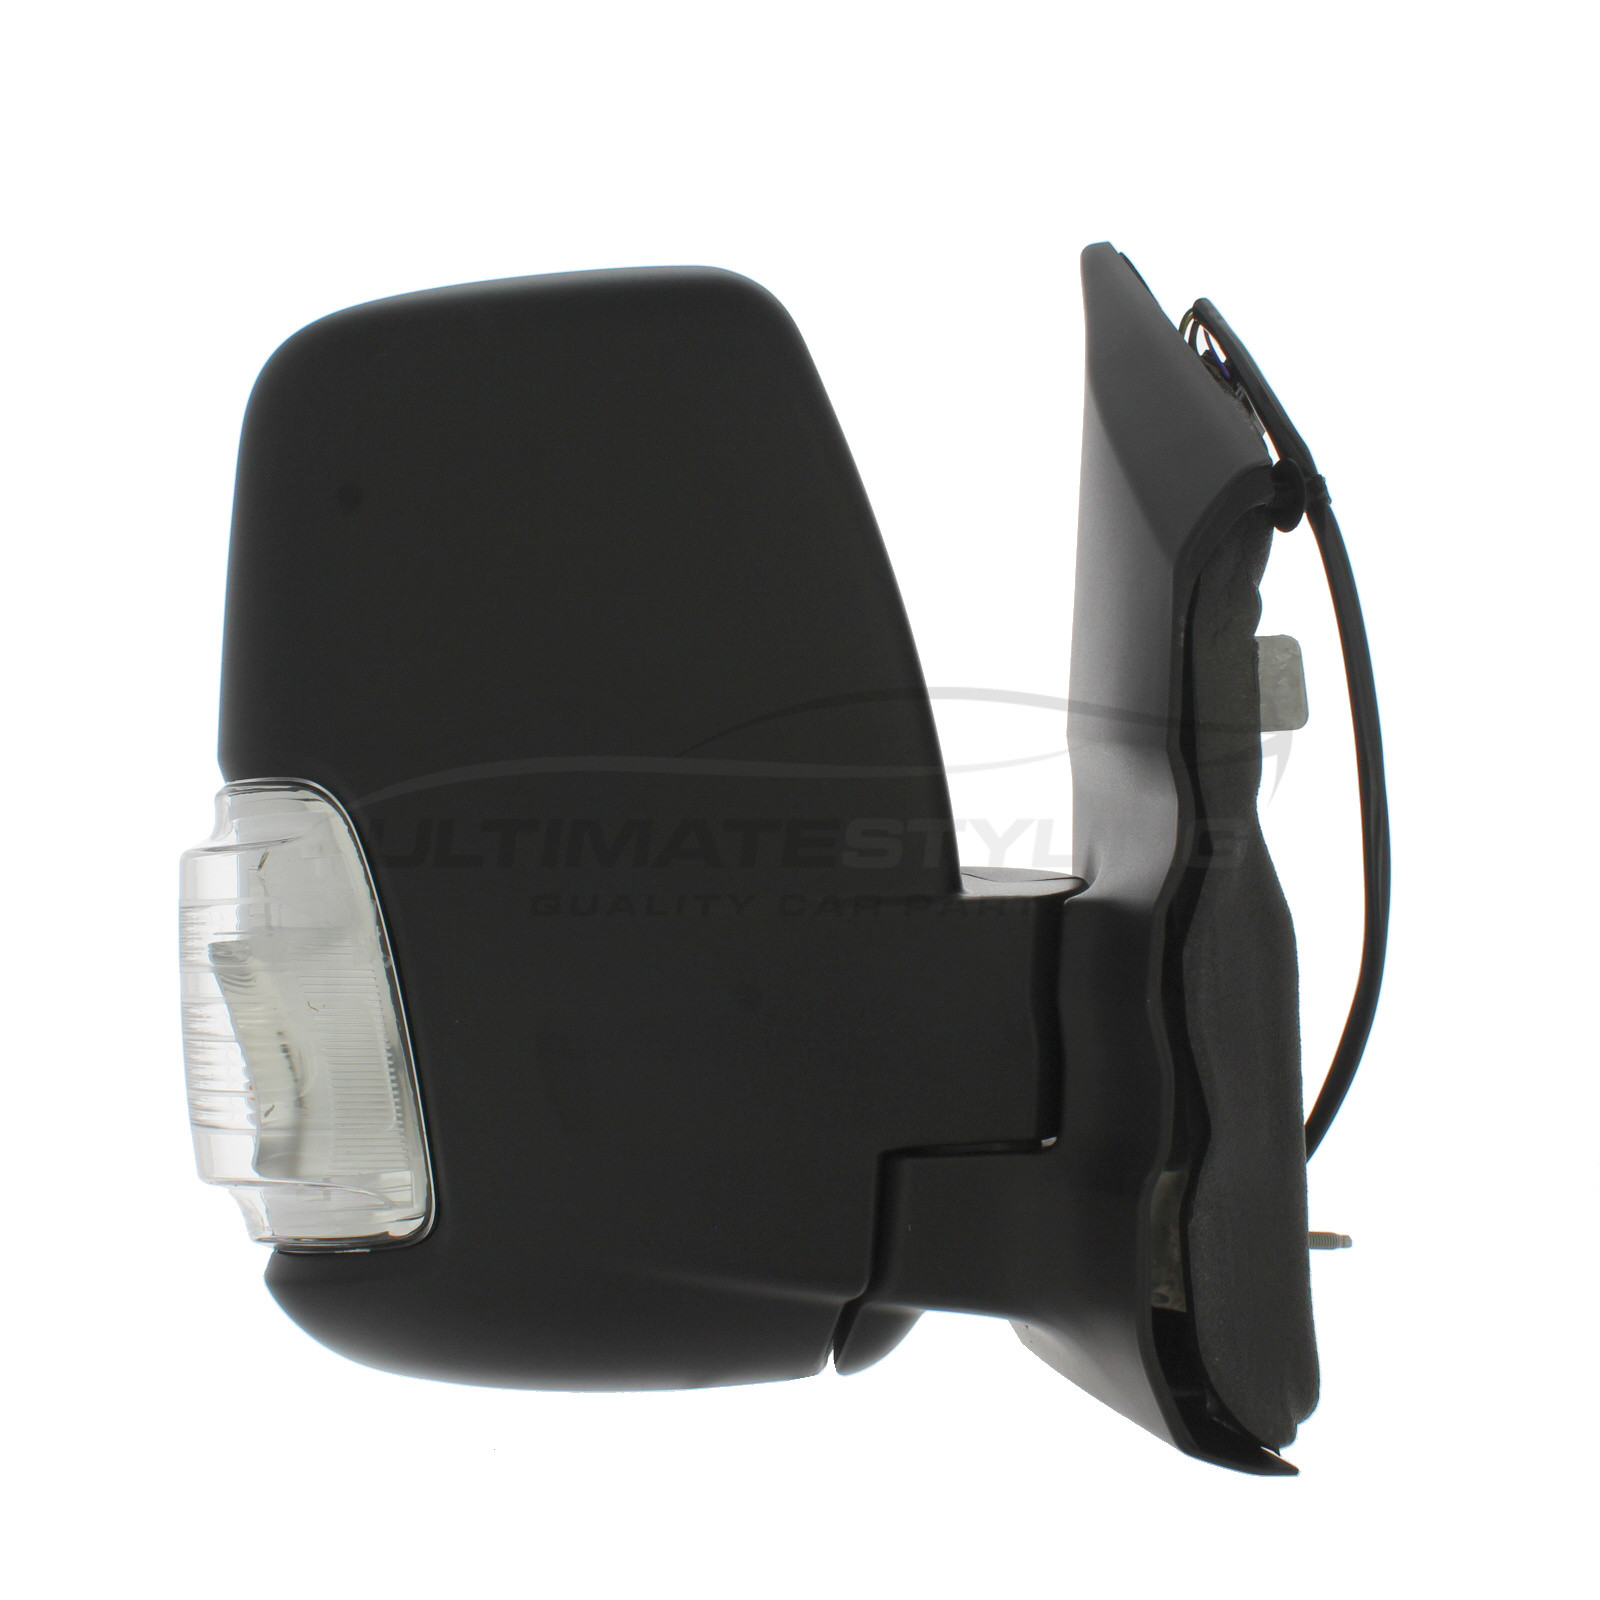 Ford Transit Wing Mirror / Door Mirror - Drivers Side (RH) - Electric adjustment - Heated Glass - Indicator - Black - Textured